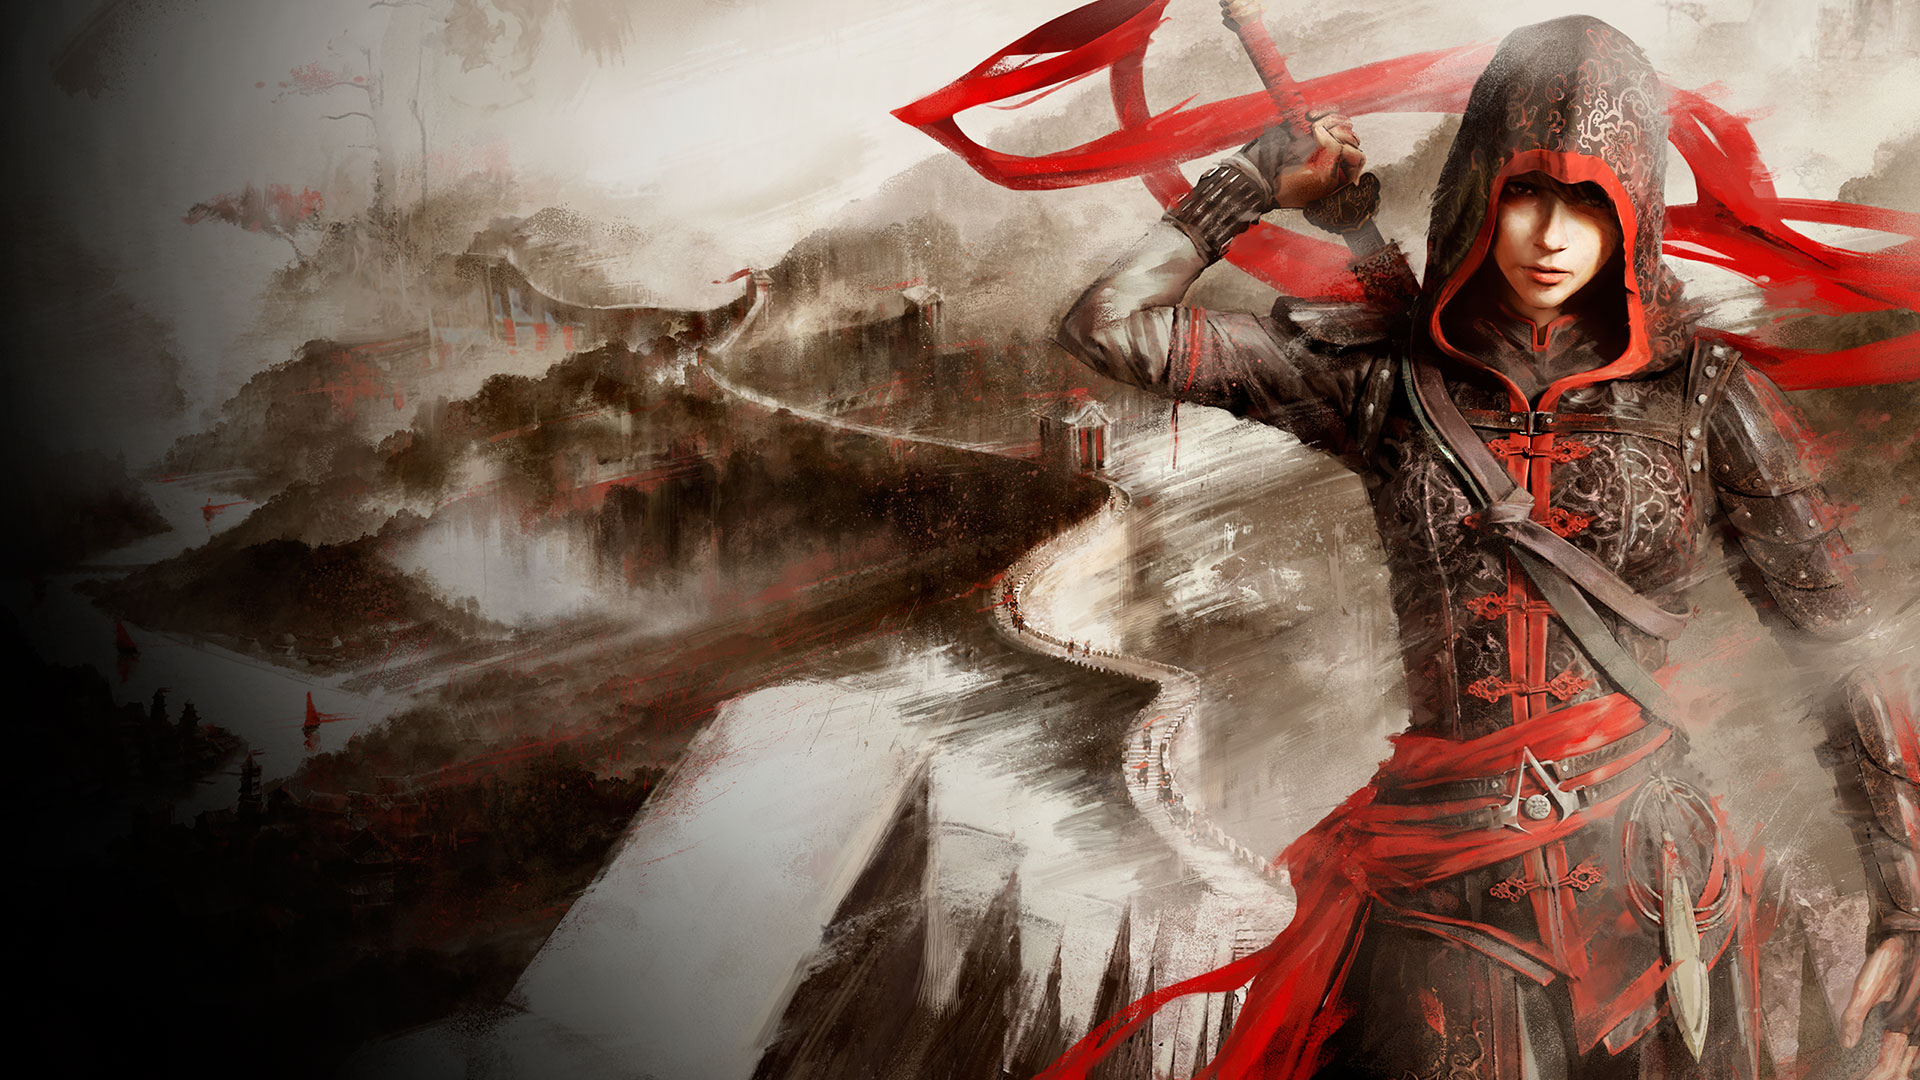 assassin's creed chronicles: china, video game, assassin's creed Desktop home screen Wallpaper